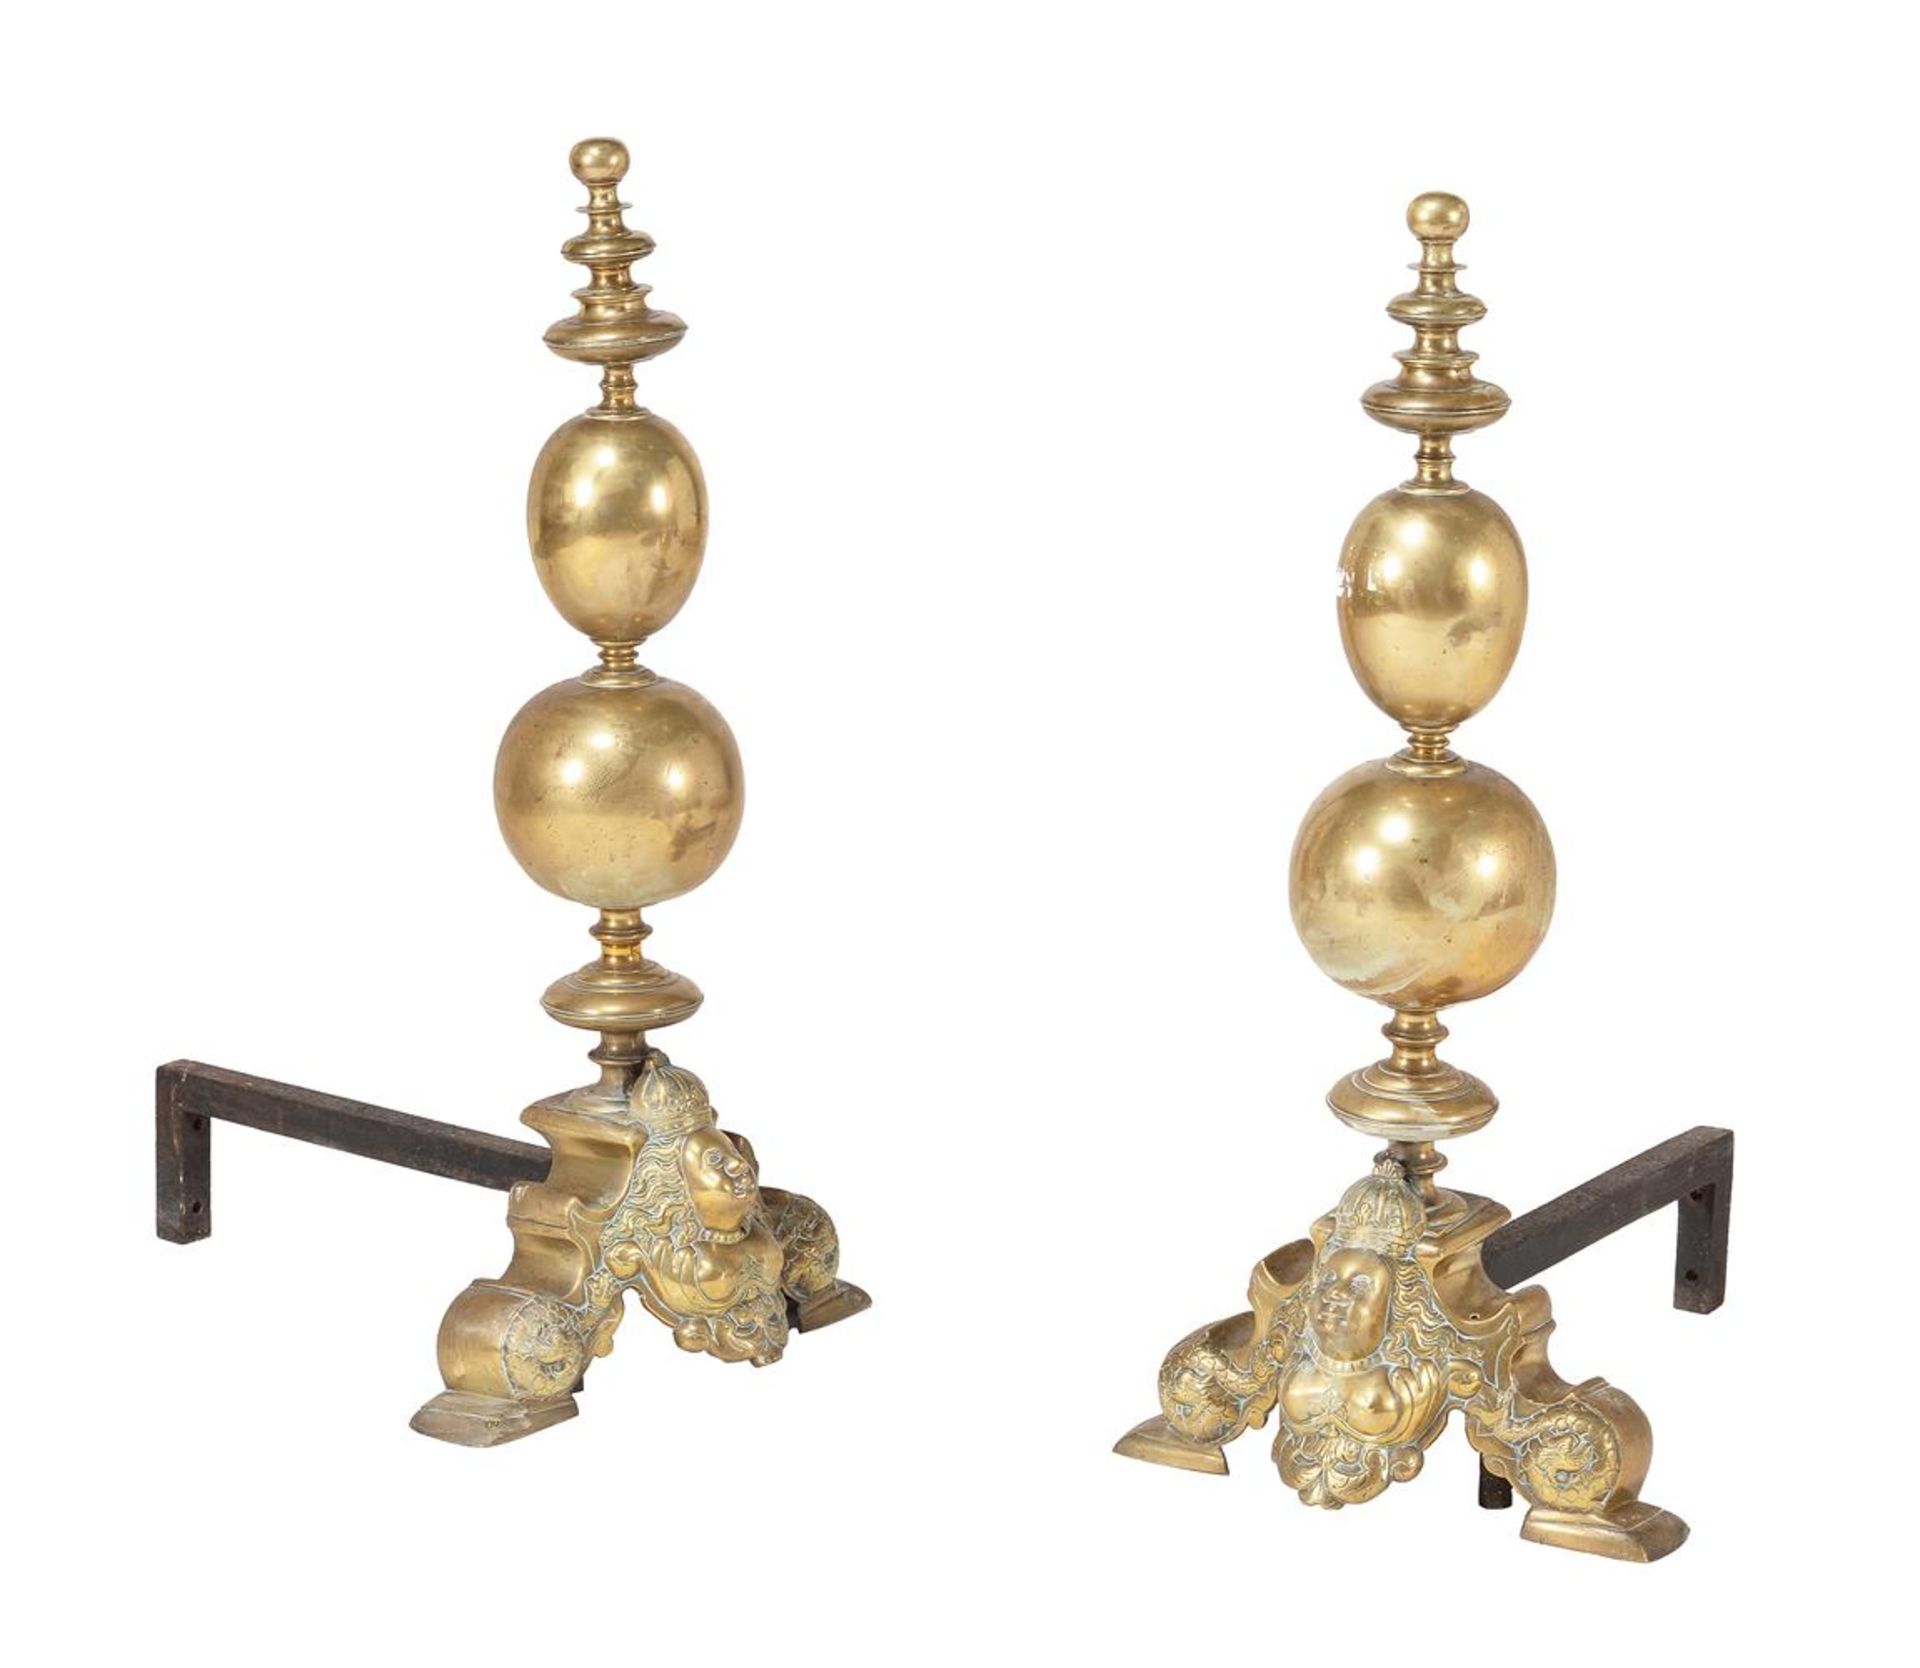 A PAIR OF BRASS AND IRON ANDIRONS OF DOUBLE-KNOPPED FORM IN 18TH CENTURY STYLE